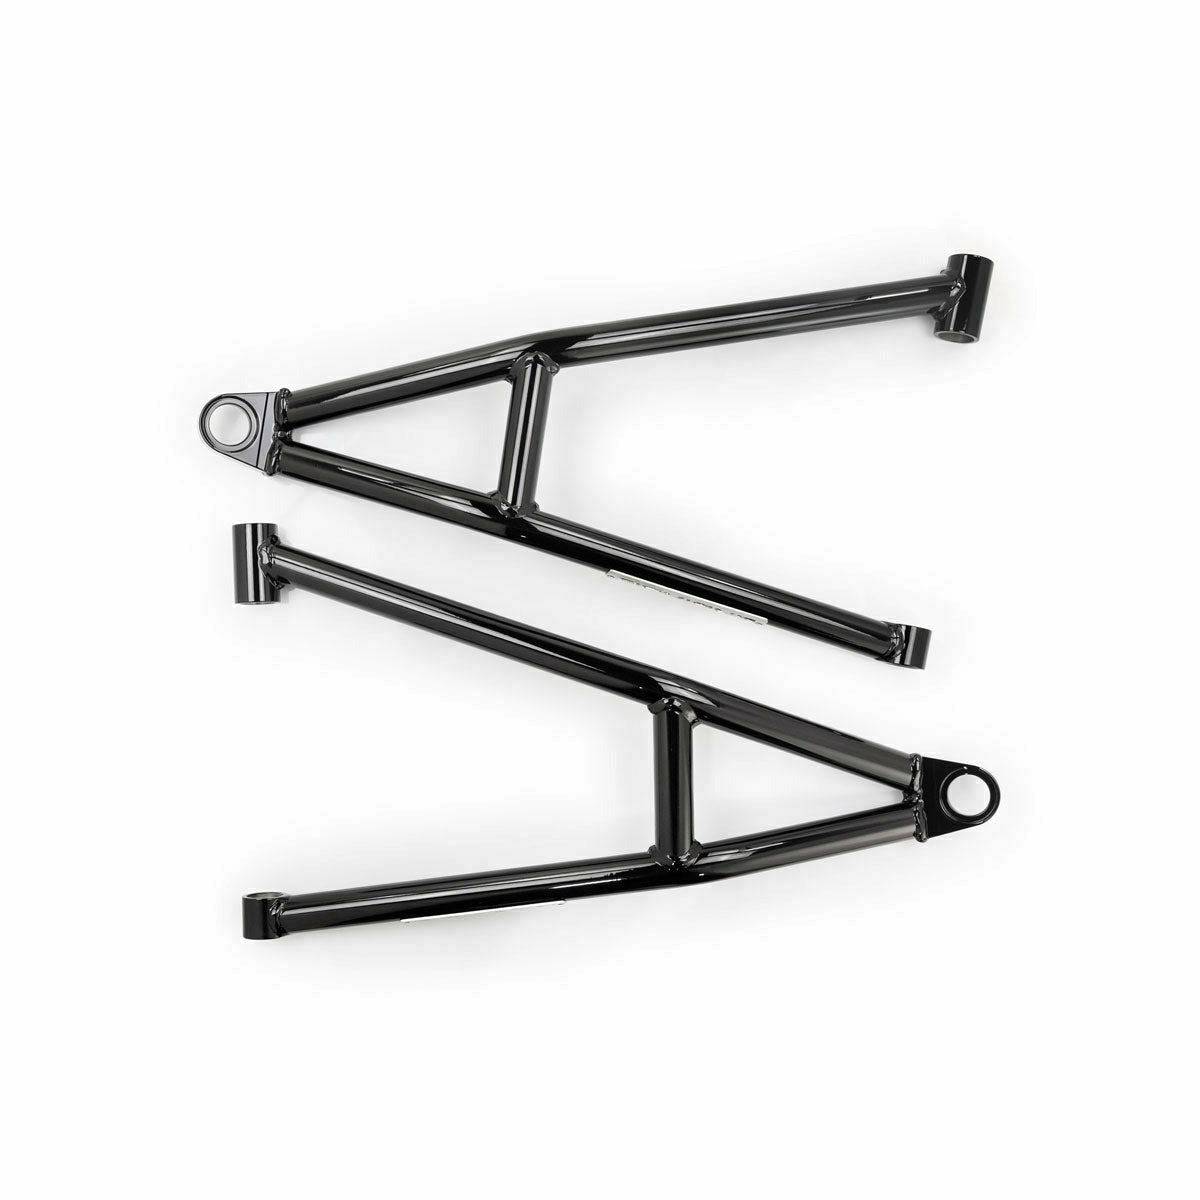 Deviant Polaris RZR PRO XP High Clearance Lower A-Arms